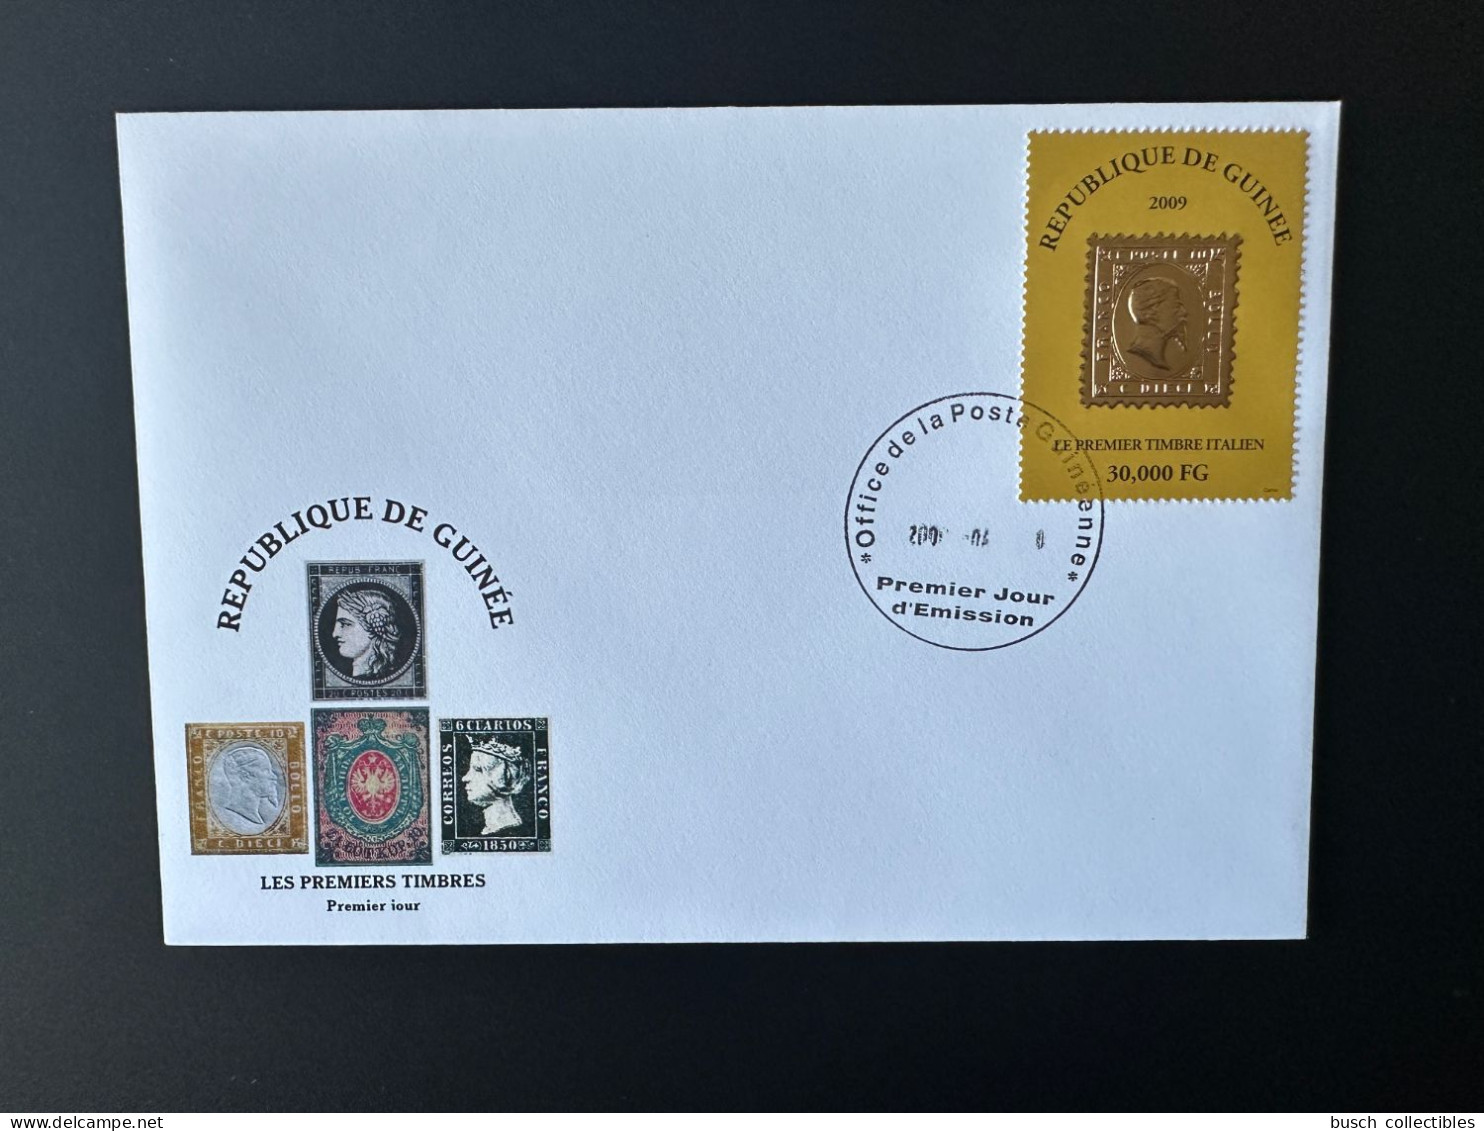 Guinée Guinea 2009 Mi. 6488 FDC Premier Timbre Italien First Italian Stamp On Stamp Gold Or Primo Francobollo Italiano - Mint/hinged